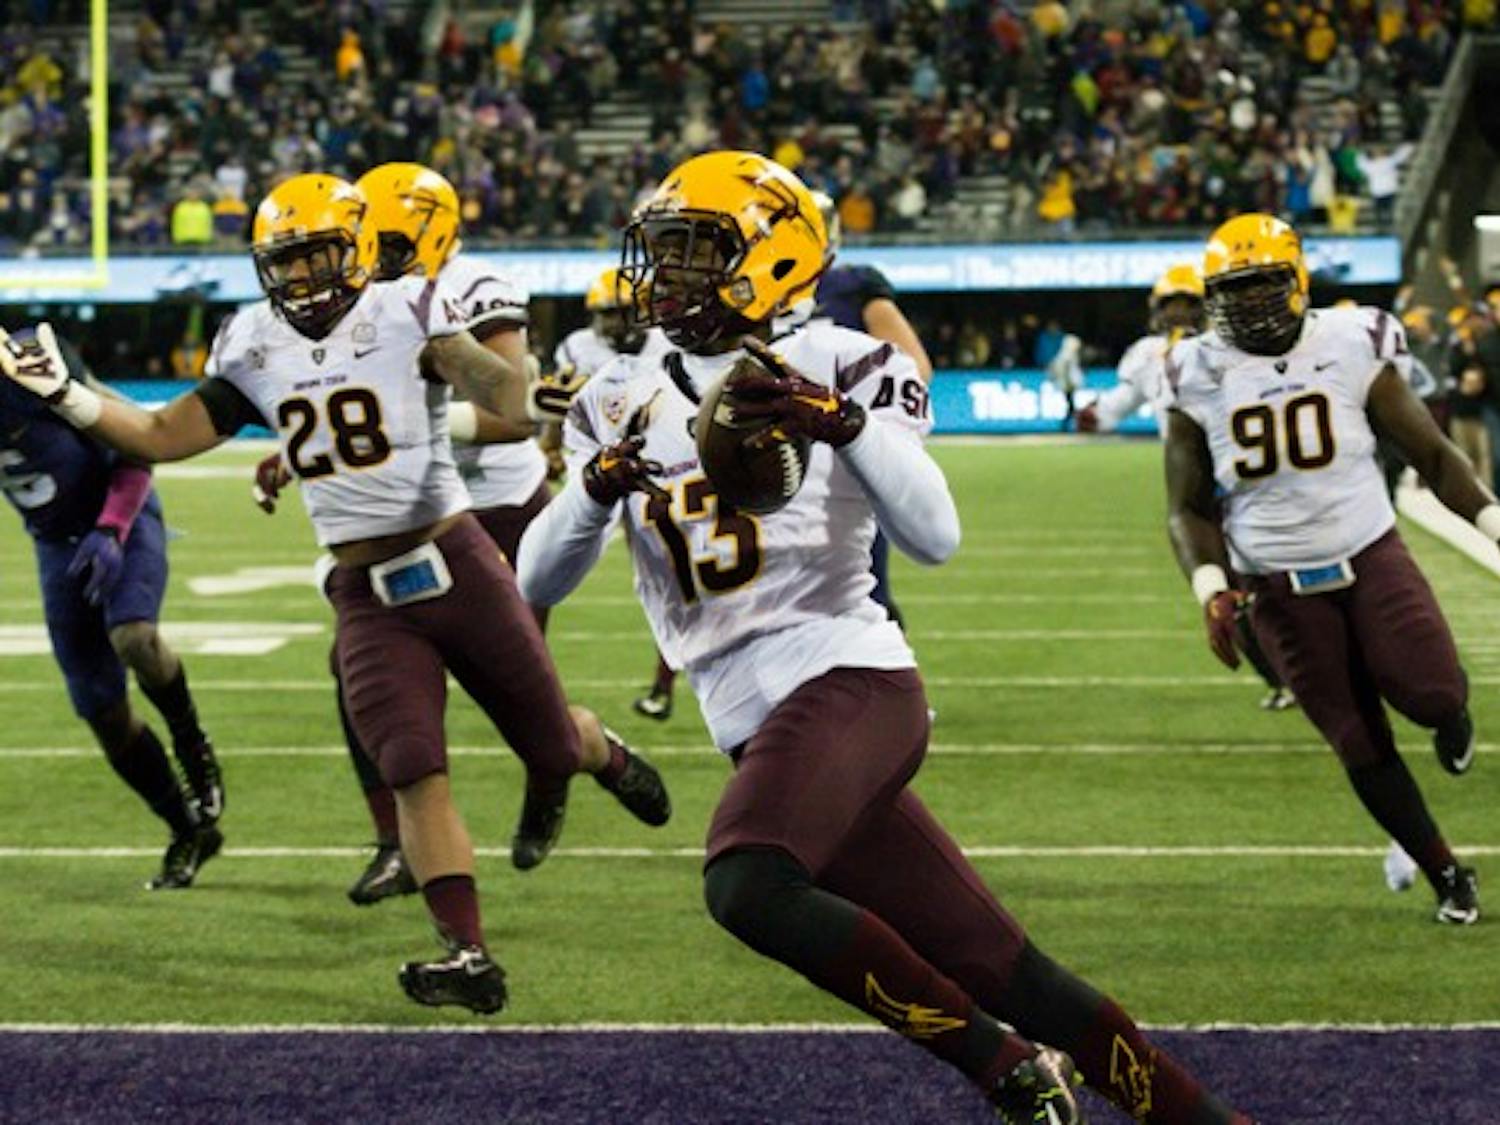 Freshman defensive back Armand Perry carries an interception for a touchdown during the 4th quarter of the game against Washington on Oct. 25. ASU defeated Washington 24-10. (Photo by Andrew Ybanez)